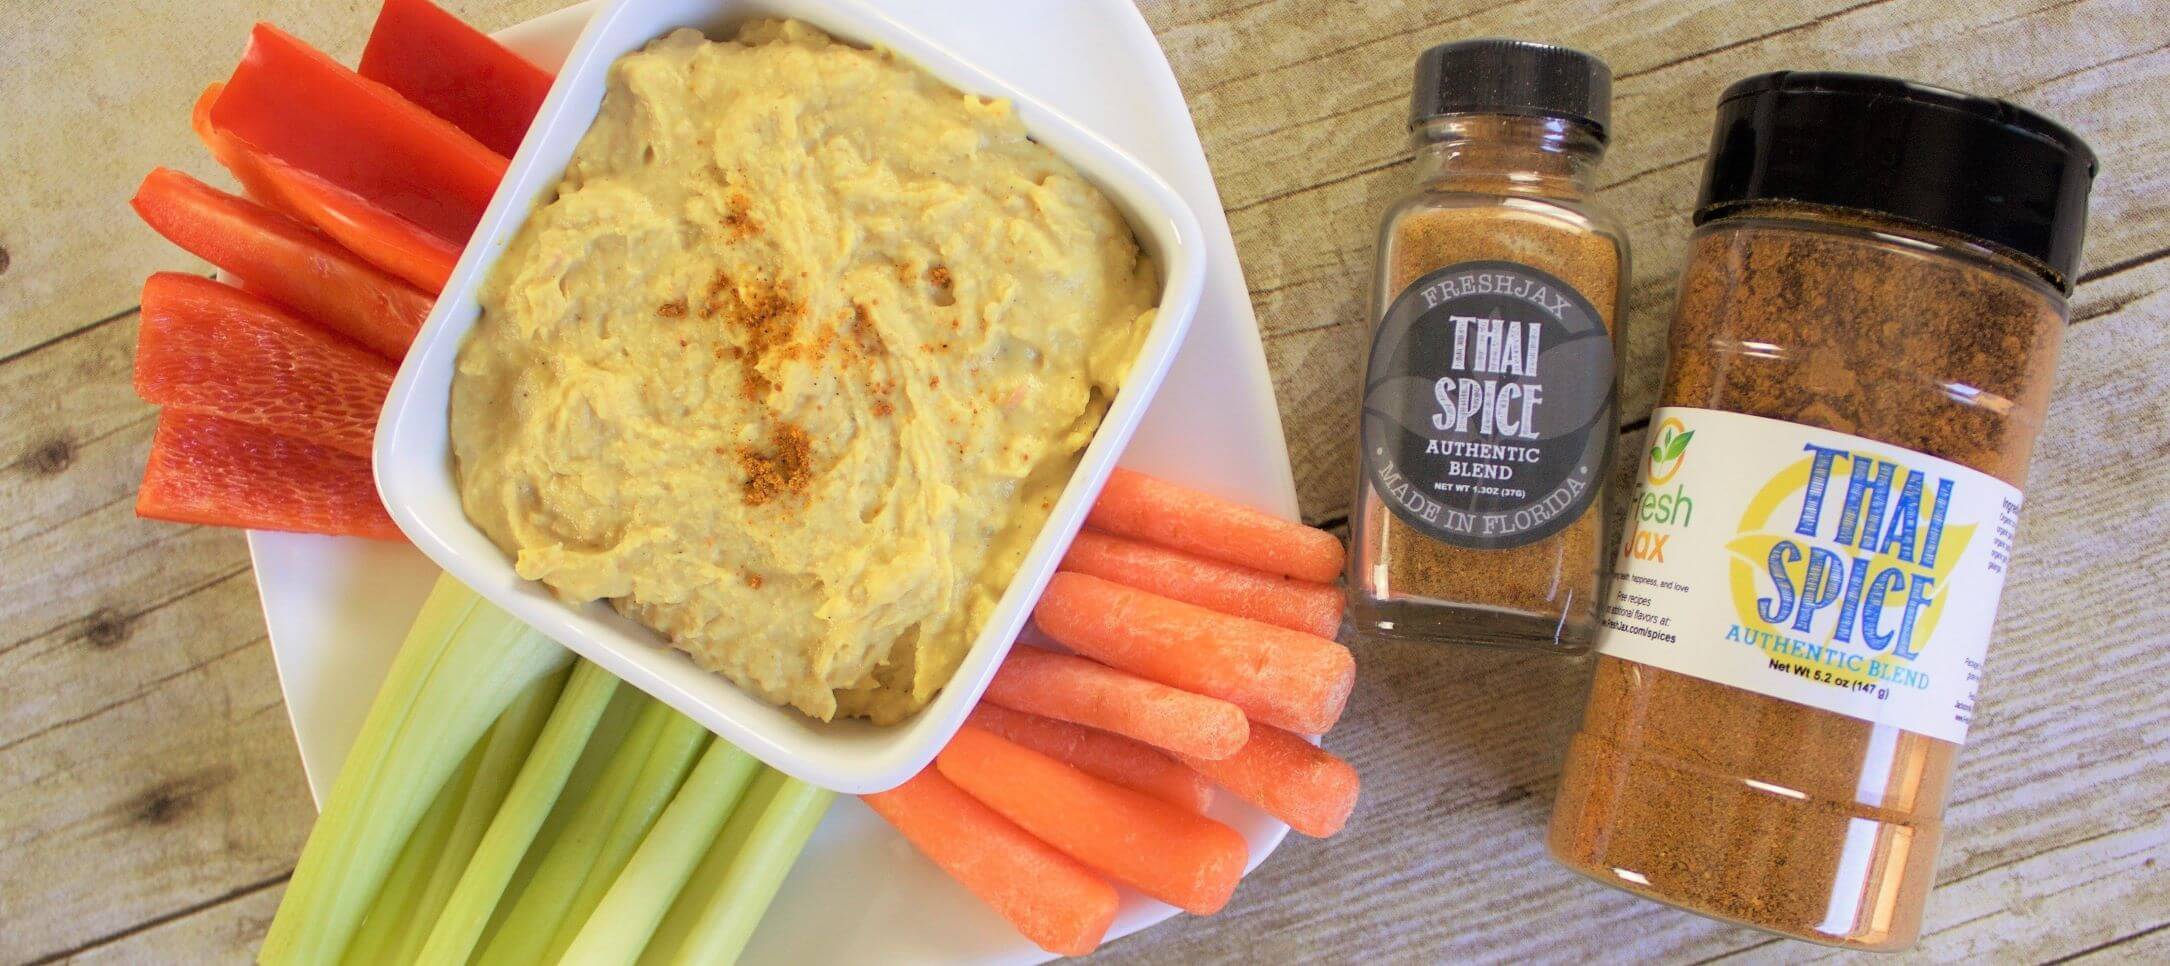 FreshJax Organic Thai Spice white bean hummus with a veggie plate of carrots, red bell peppers, and celery 